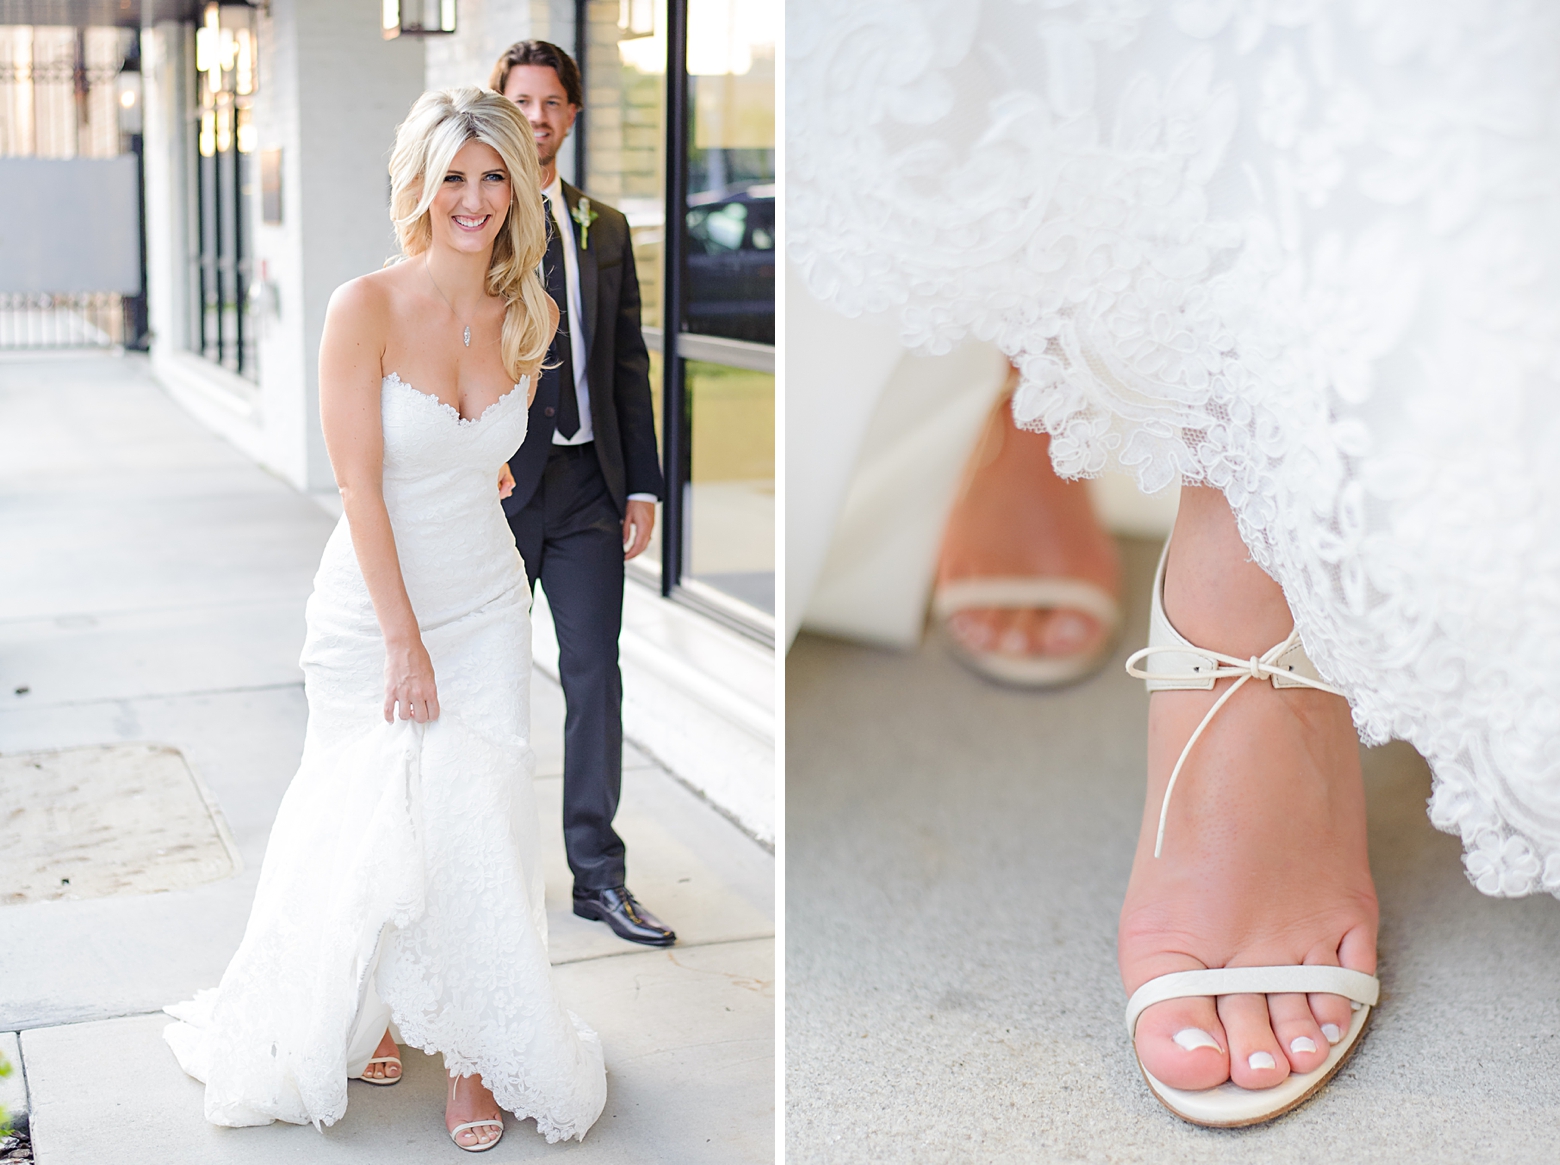 The Bride leads her Groom down the Tampa, FL streets in her designer heels